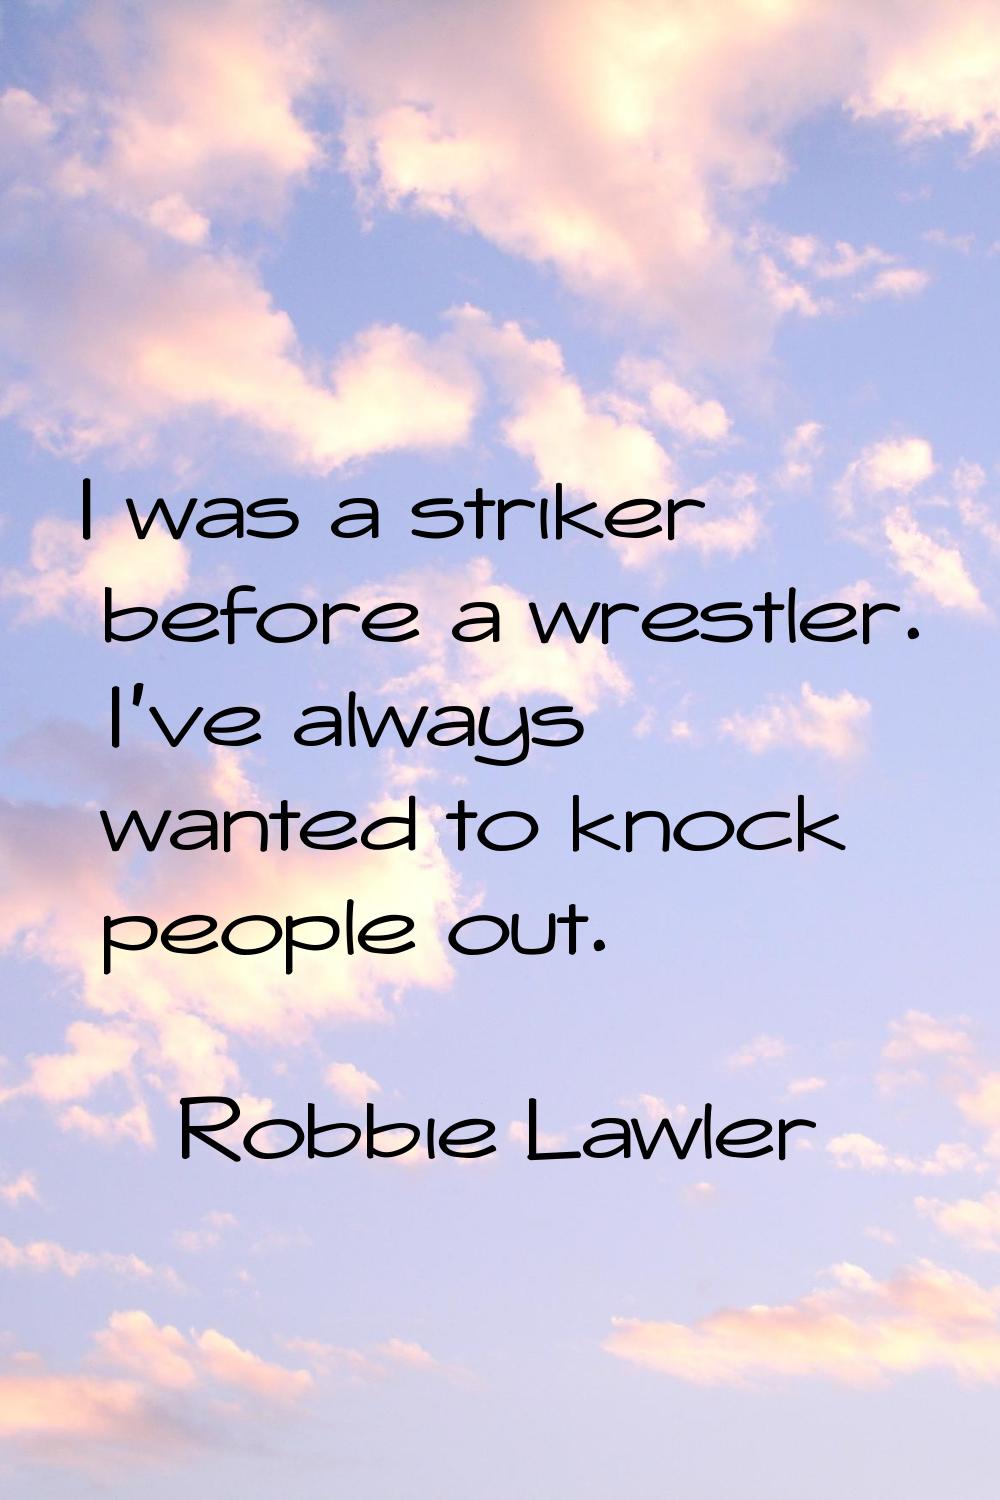 I was a striker before a wrestler. I've always wanted to knock people out.